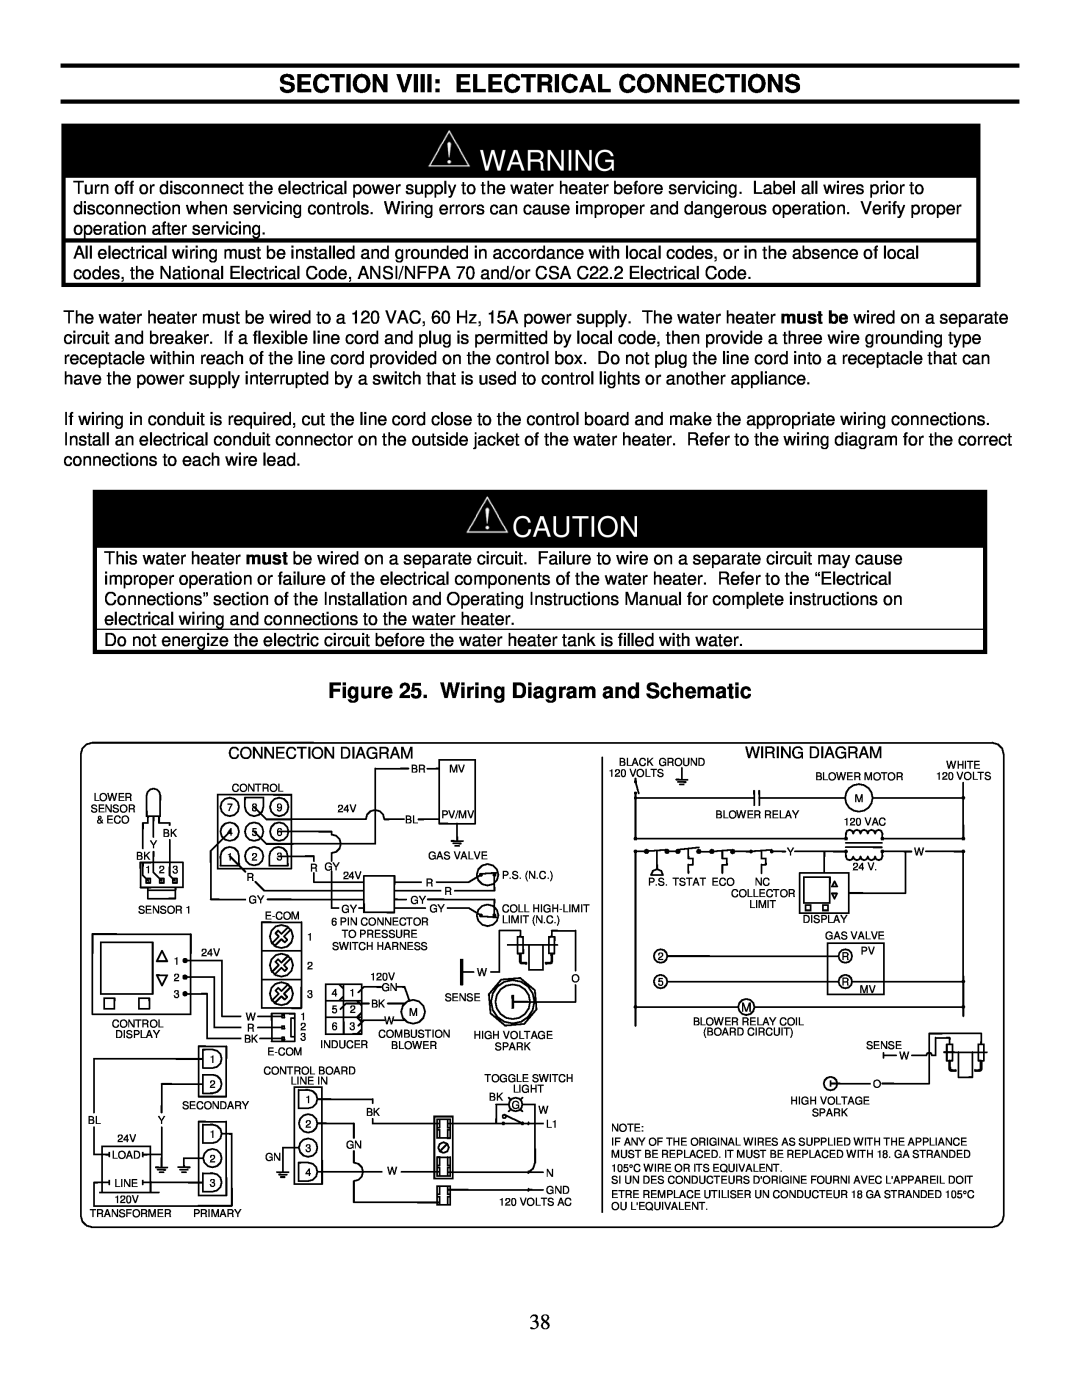 Bradford-White Corp 238-48384-00F warranty Section Viii Electrical Connections, Wiring Diagram and Schematic 